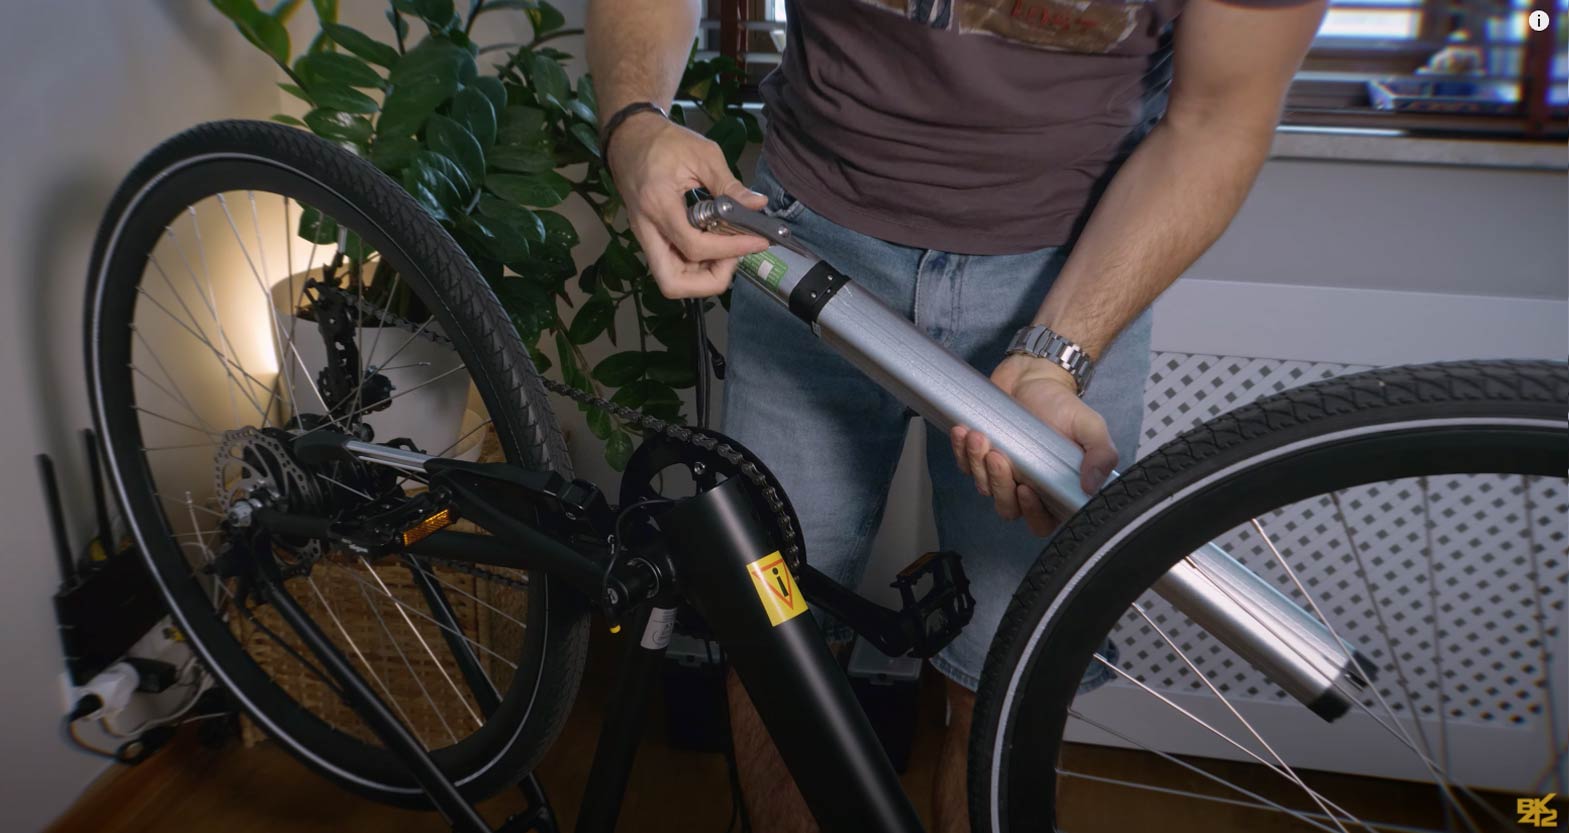 How to get rid of Accolmile Road Ebike's built-in battery noise